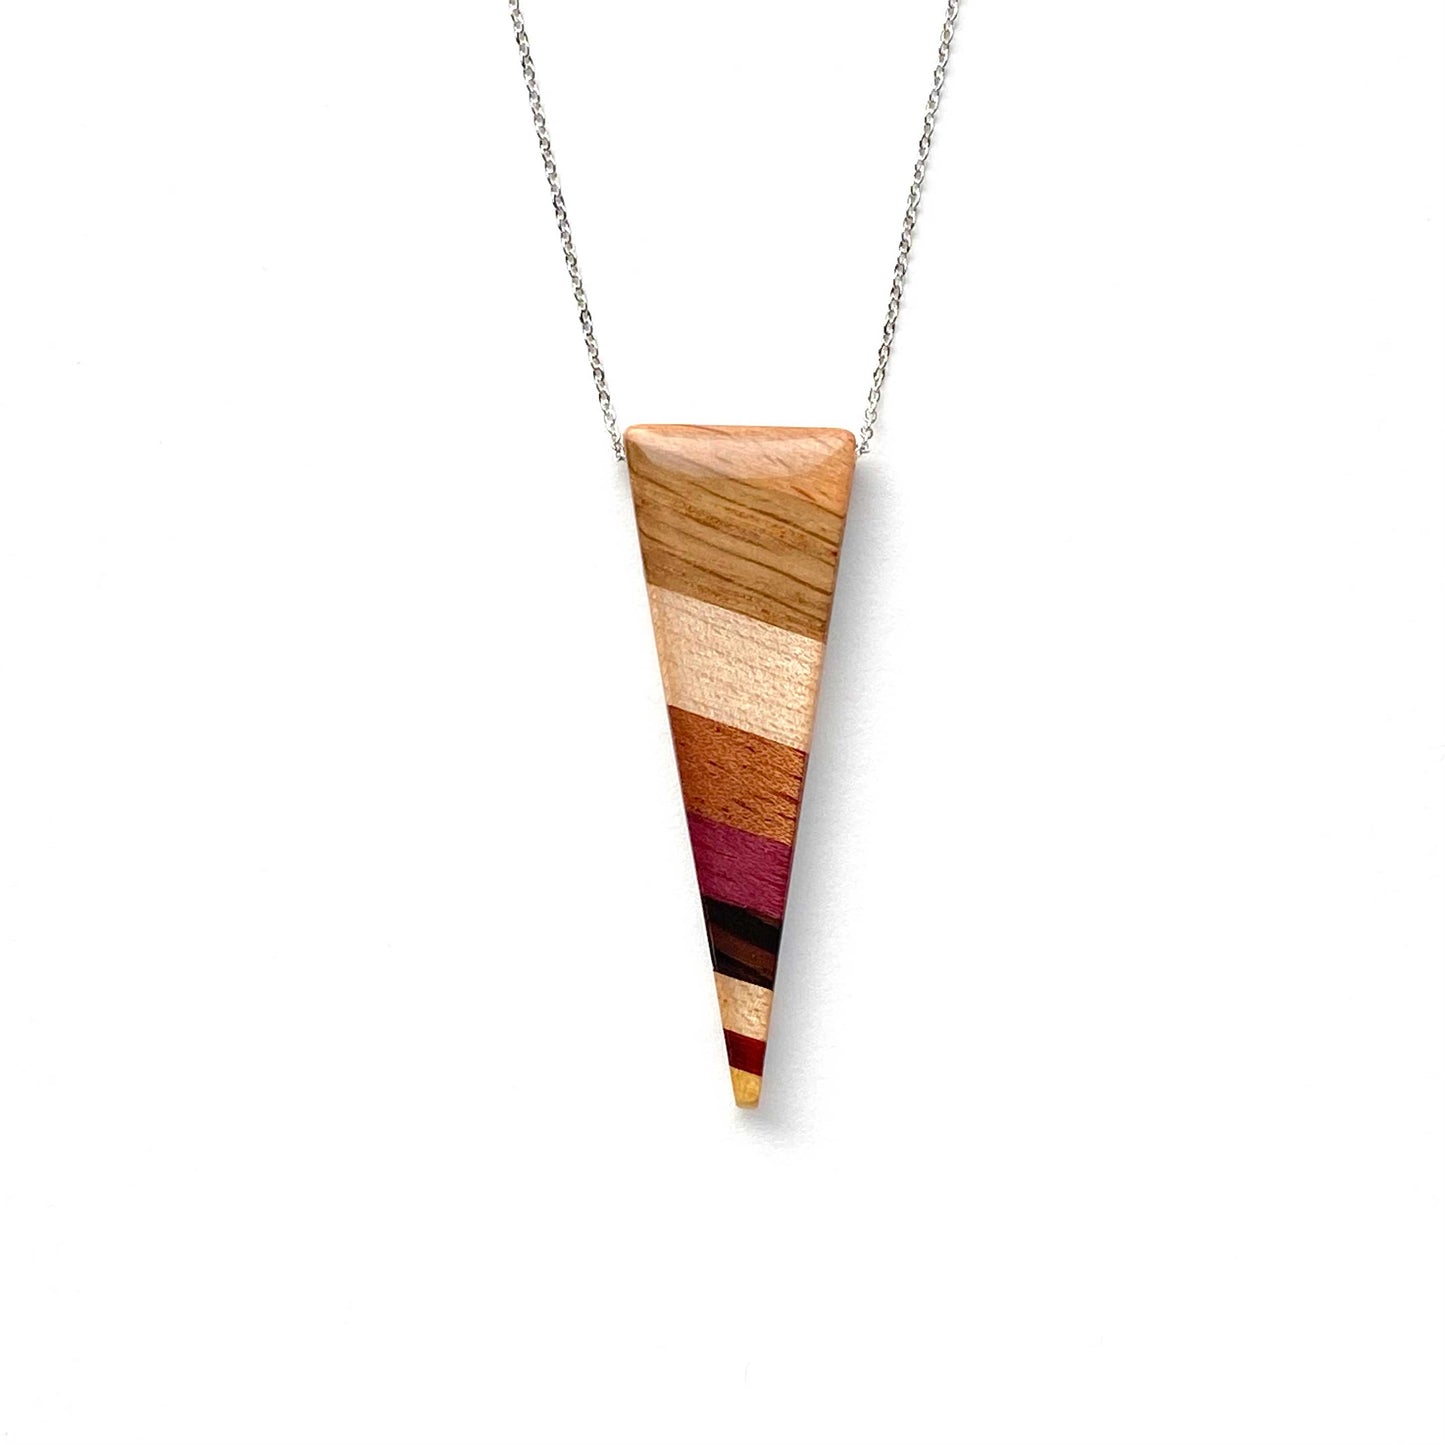 Spears Reclaimed Wood Necklace